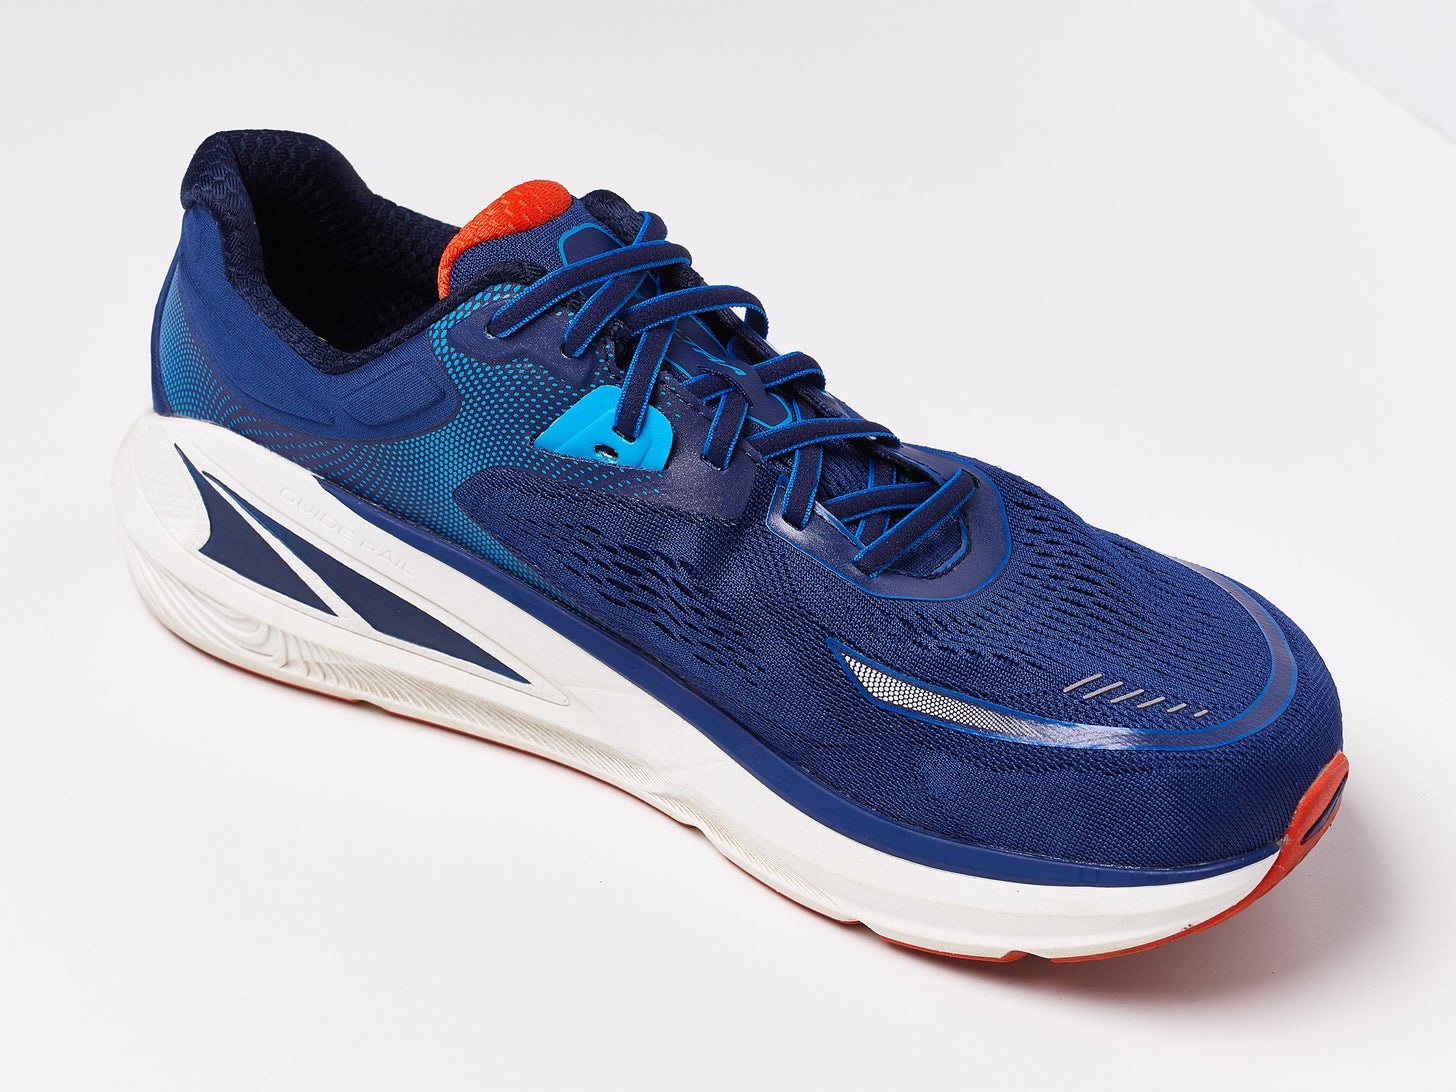 Altra Paradigm 6 Shoe Review | Running Warehouse